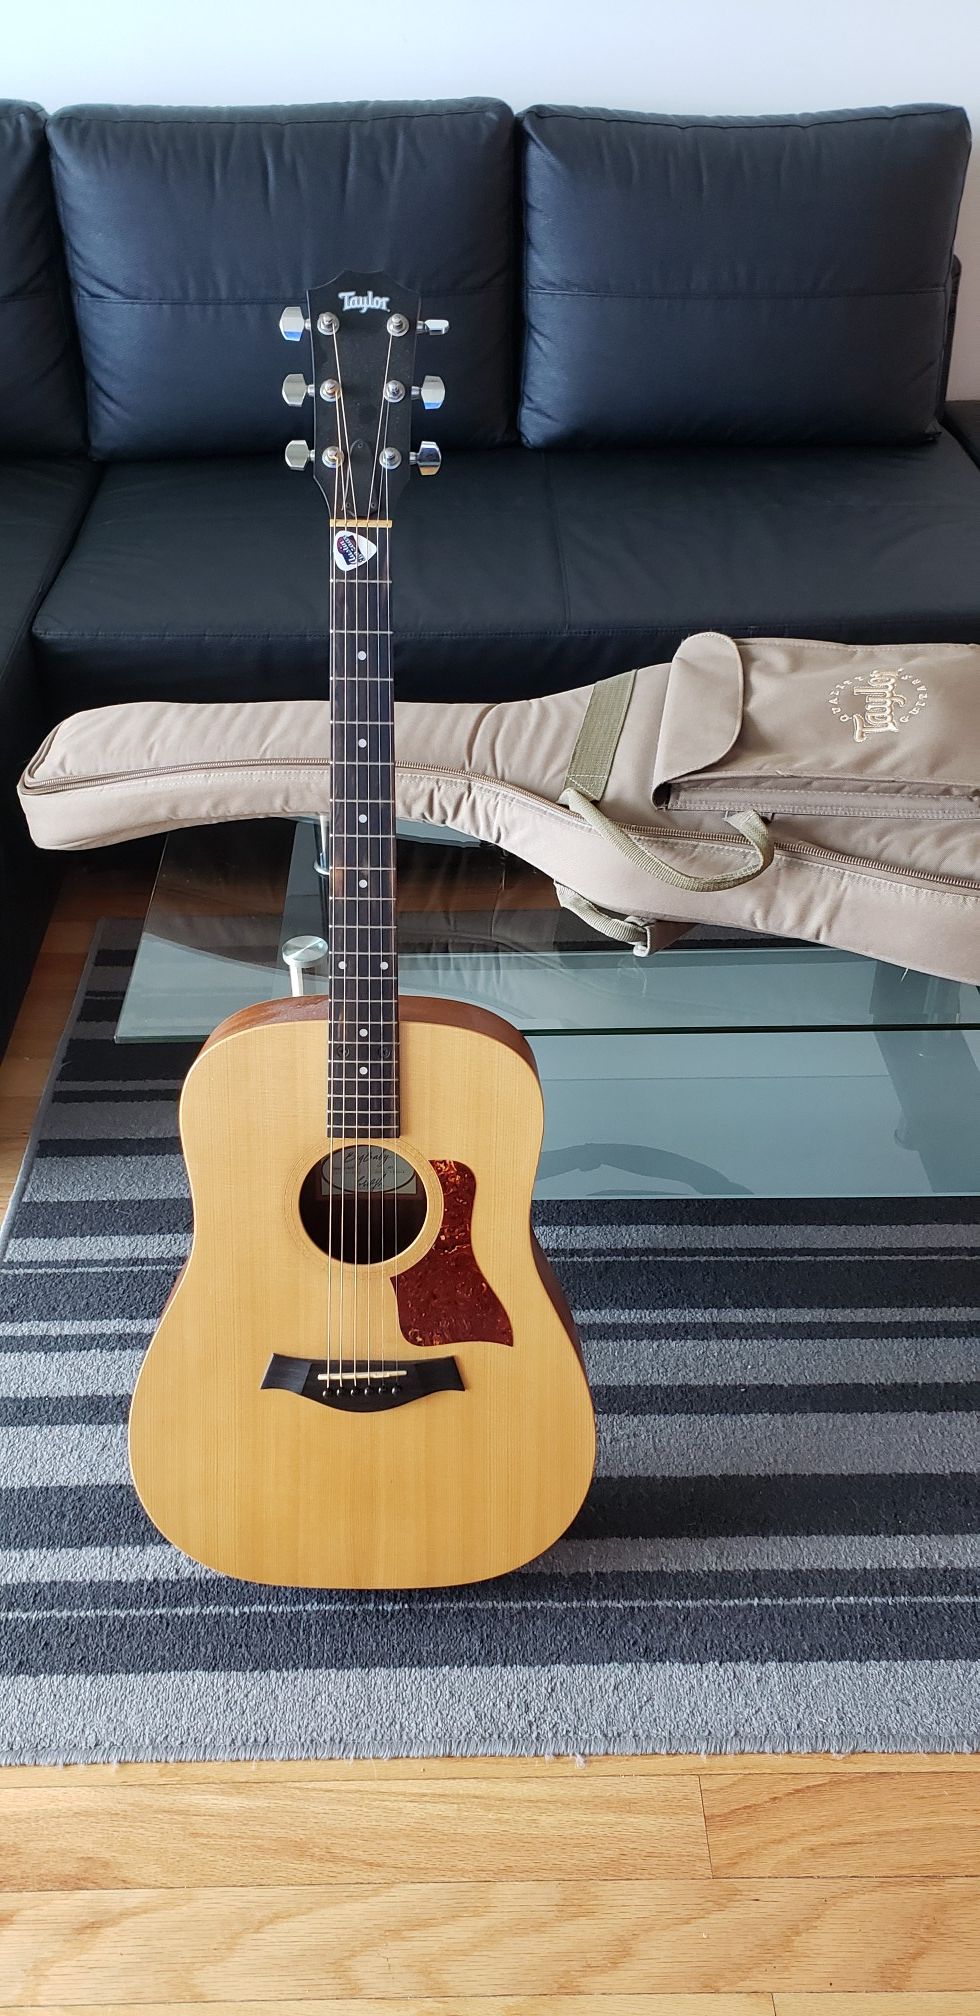 TAYLOR acoustic guitar LIKE NEW, Price is Firm at $300